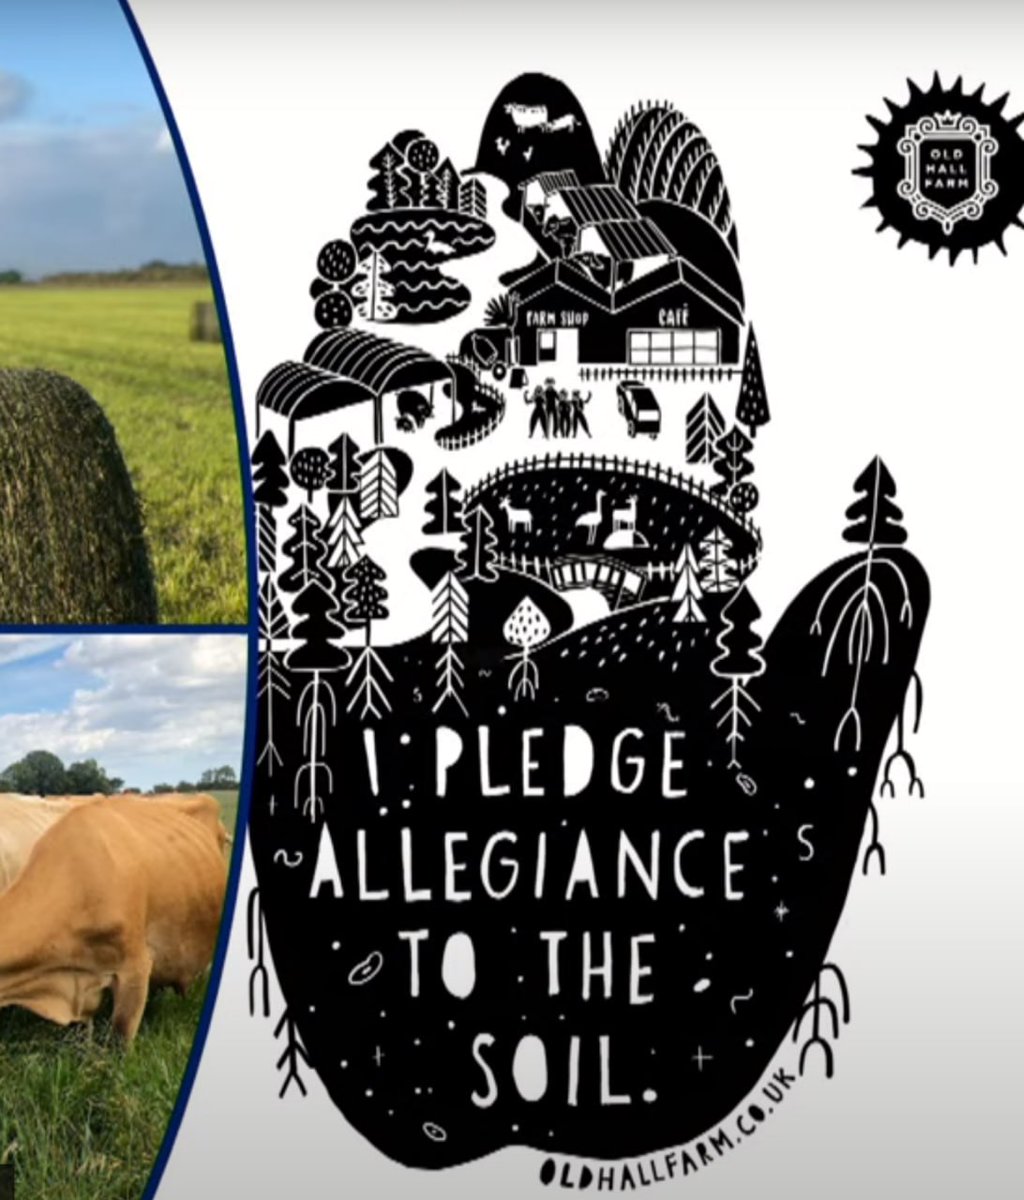 Love this pledge to the soil 😞
Farm Deep Dive with Rebecca Mayhew - Old Hall Farm a 500 acre farm turned into a regenerative oasis. Inspirational #regenerativefarming #regenerativeagriculture #regenag #oldhallfarm #soil #holistic #holisticmanagement #ORFC24